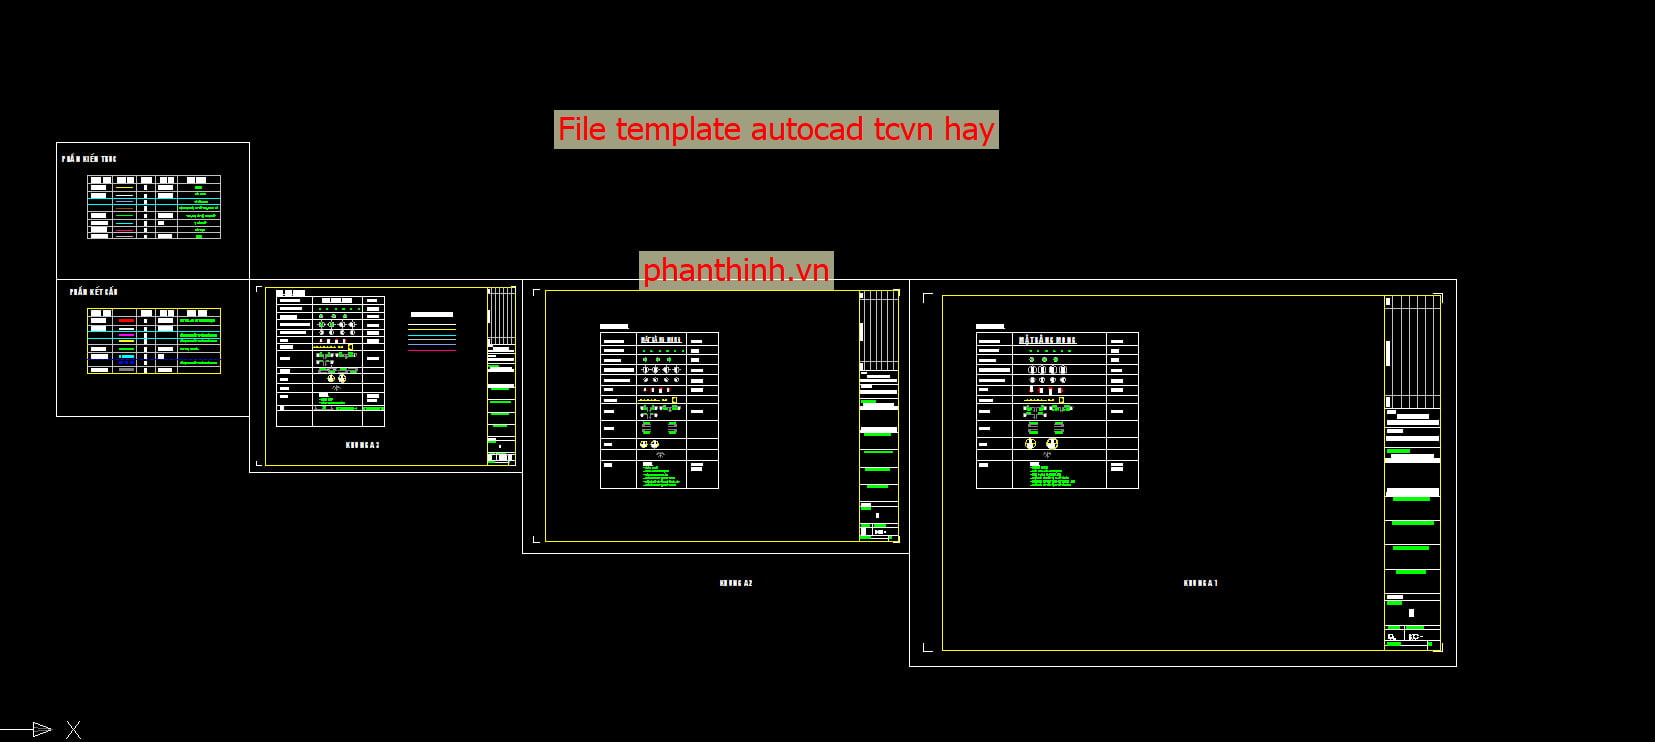 File Template Autocad Theo Tcvn, File Cad Mẫu Với Bộ Layer Chuẩn Trong Cad